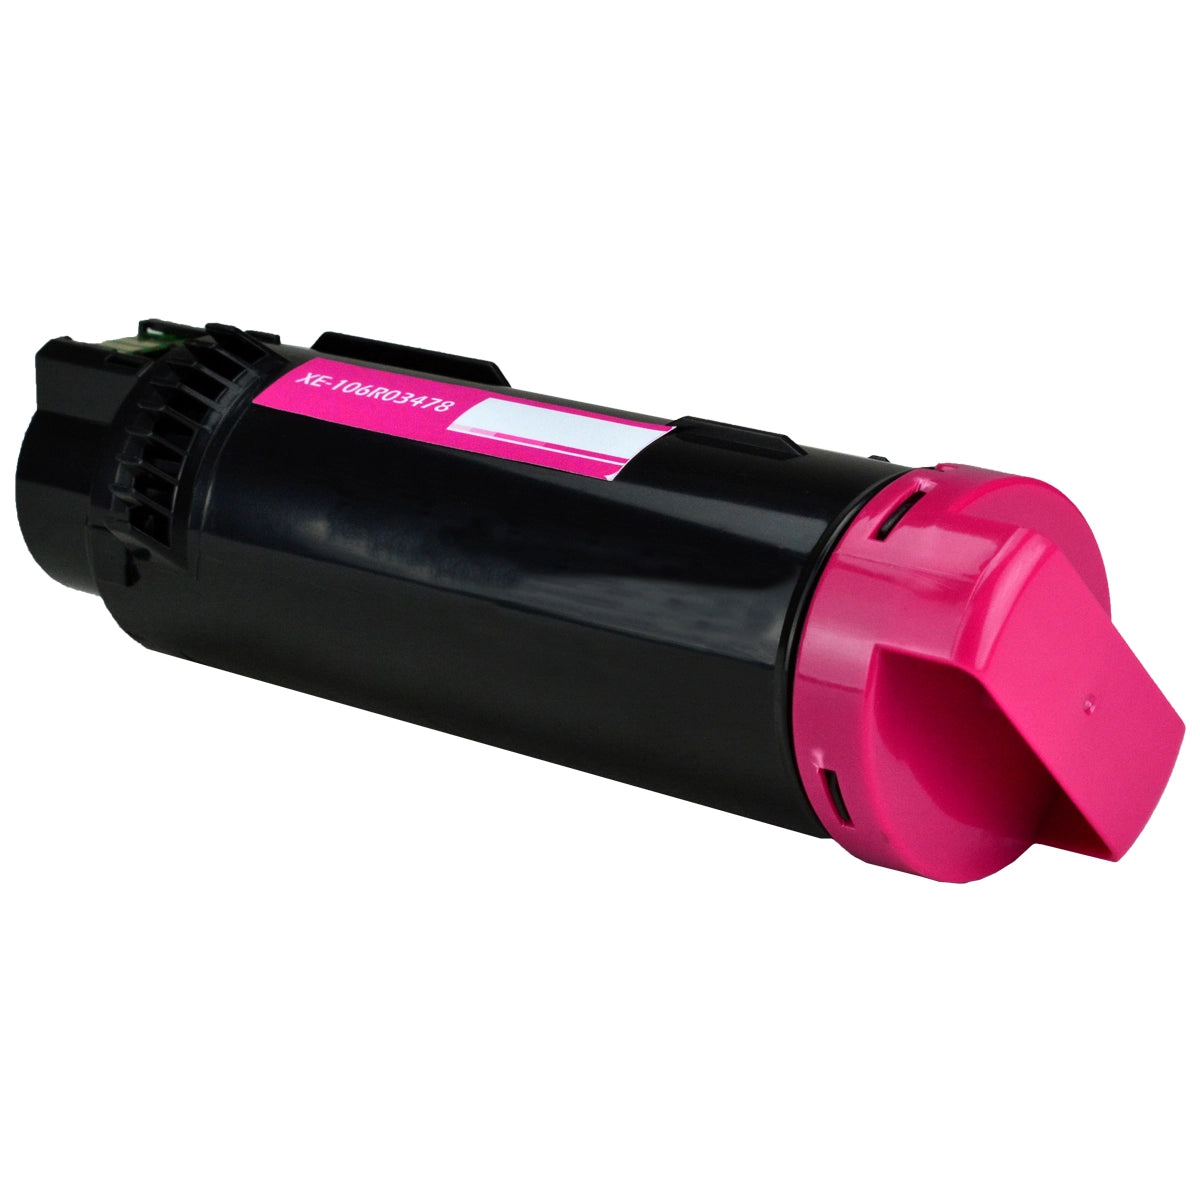 Xerox Phaser 6510/ Workcentre 6515 (106R03478) Magenta High Capacity Compatible Toner Cartridge